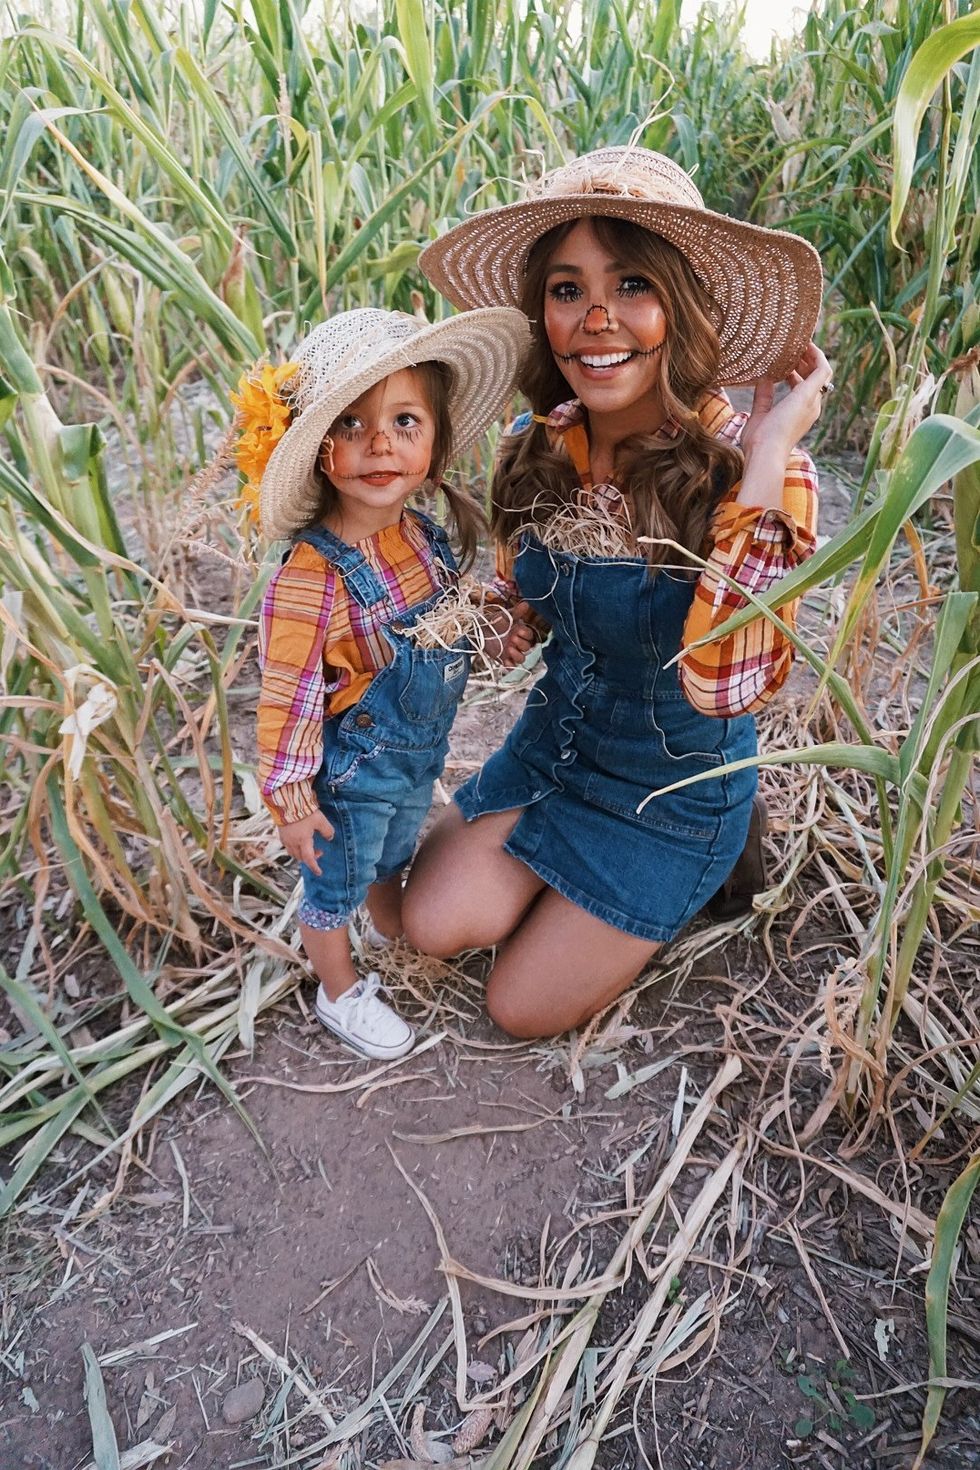 https://hips.hearstapps.com/hmg-prod/images/diy-scarecrow-costume-mommy-me-1595858518.jpg?crop=0.9975308641975308xw:1xh;center,top&resize=980:*